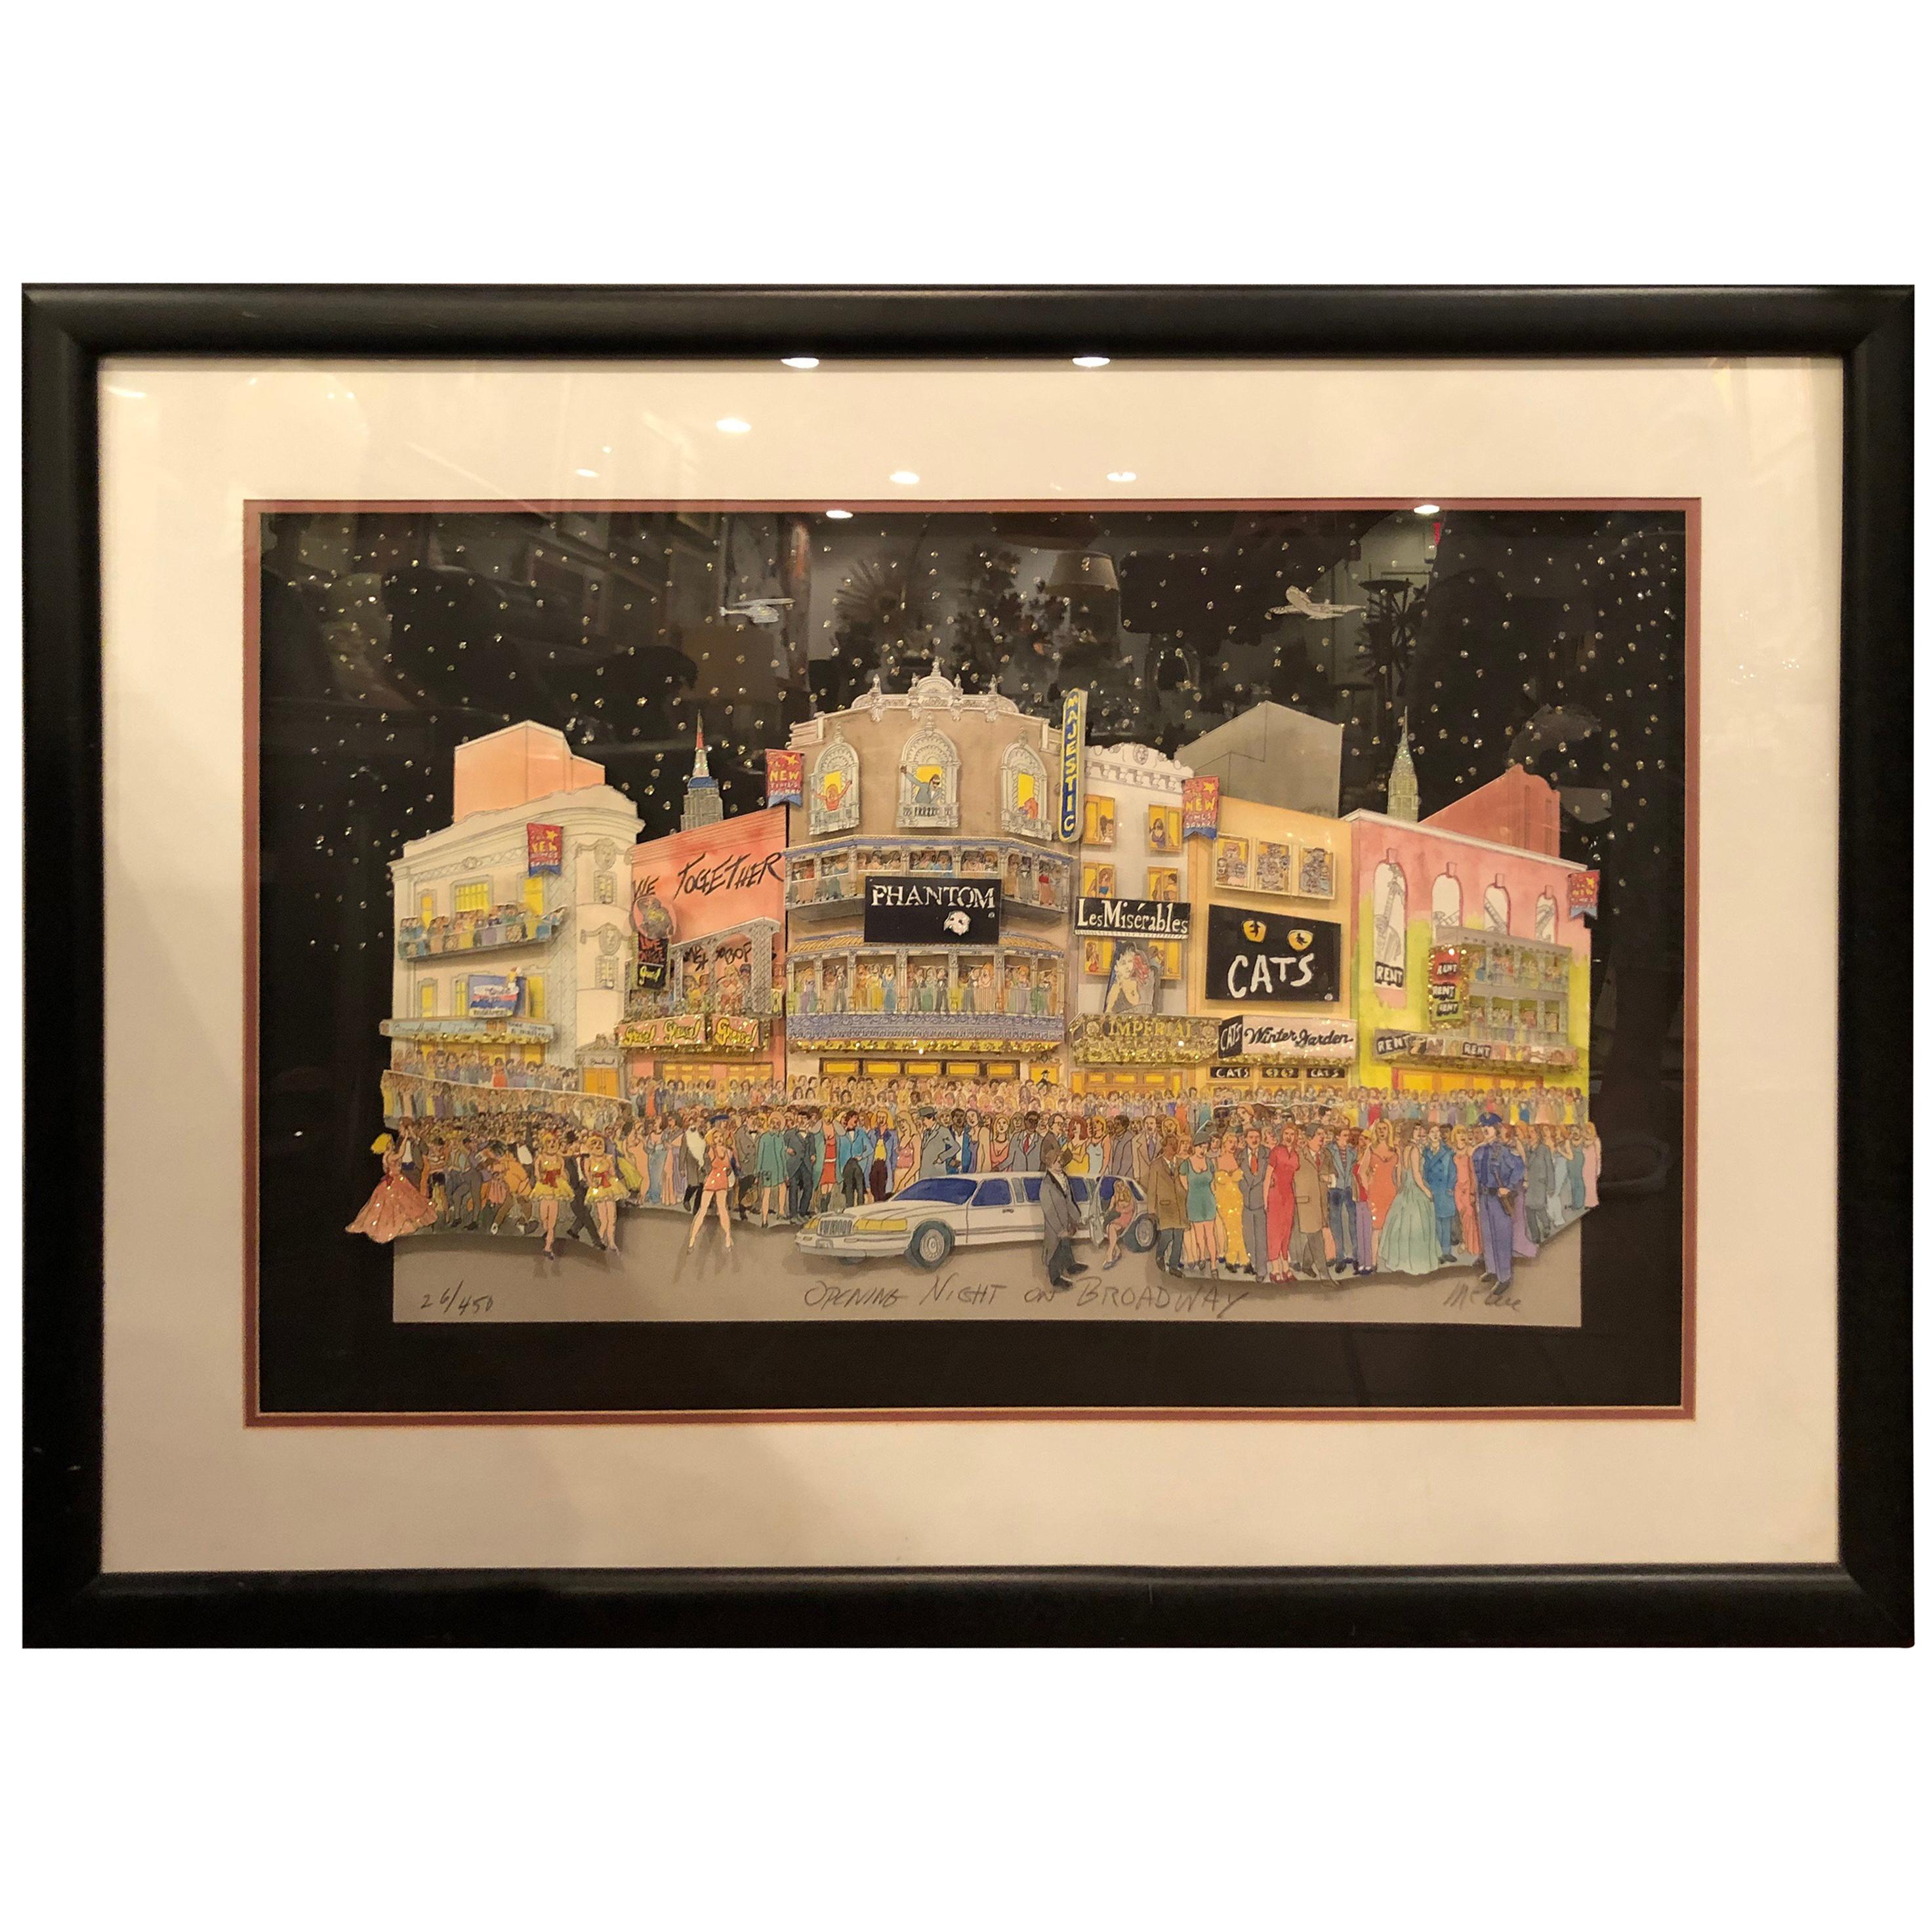 Signed 3 D Art of Broadway by McCue